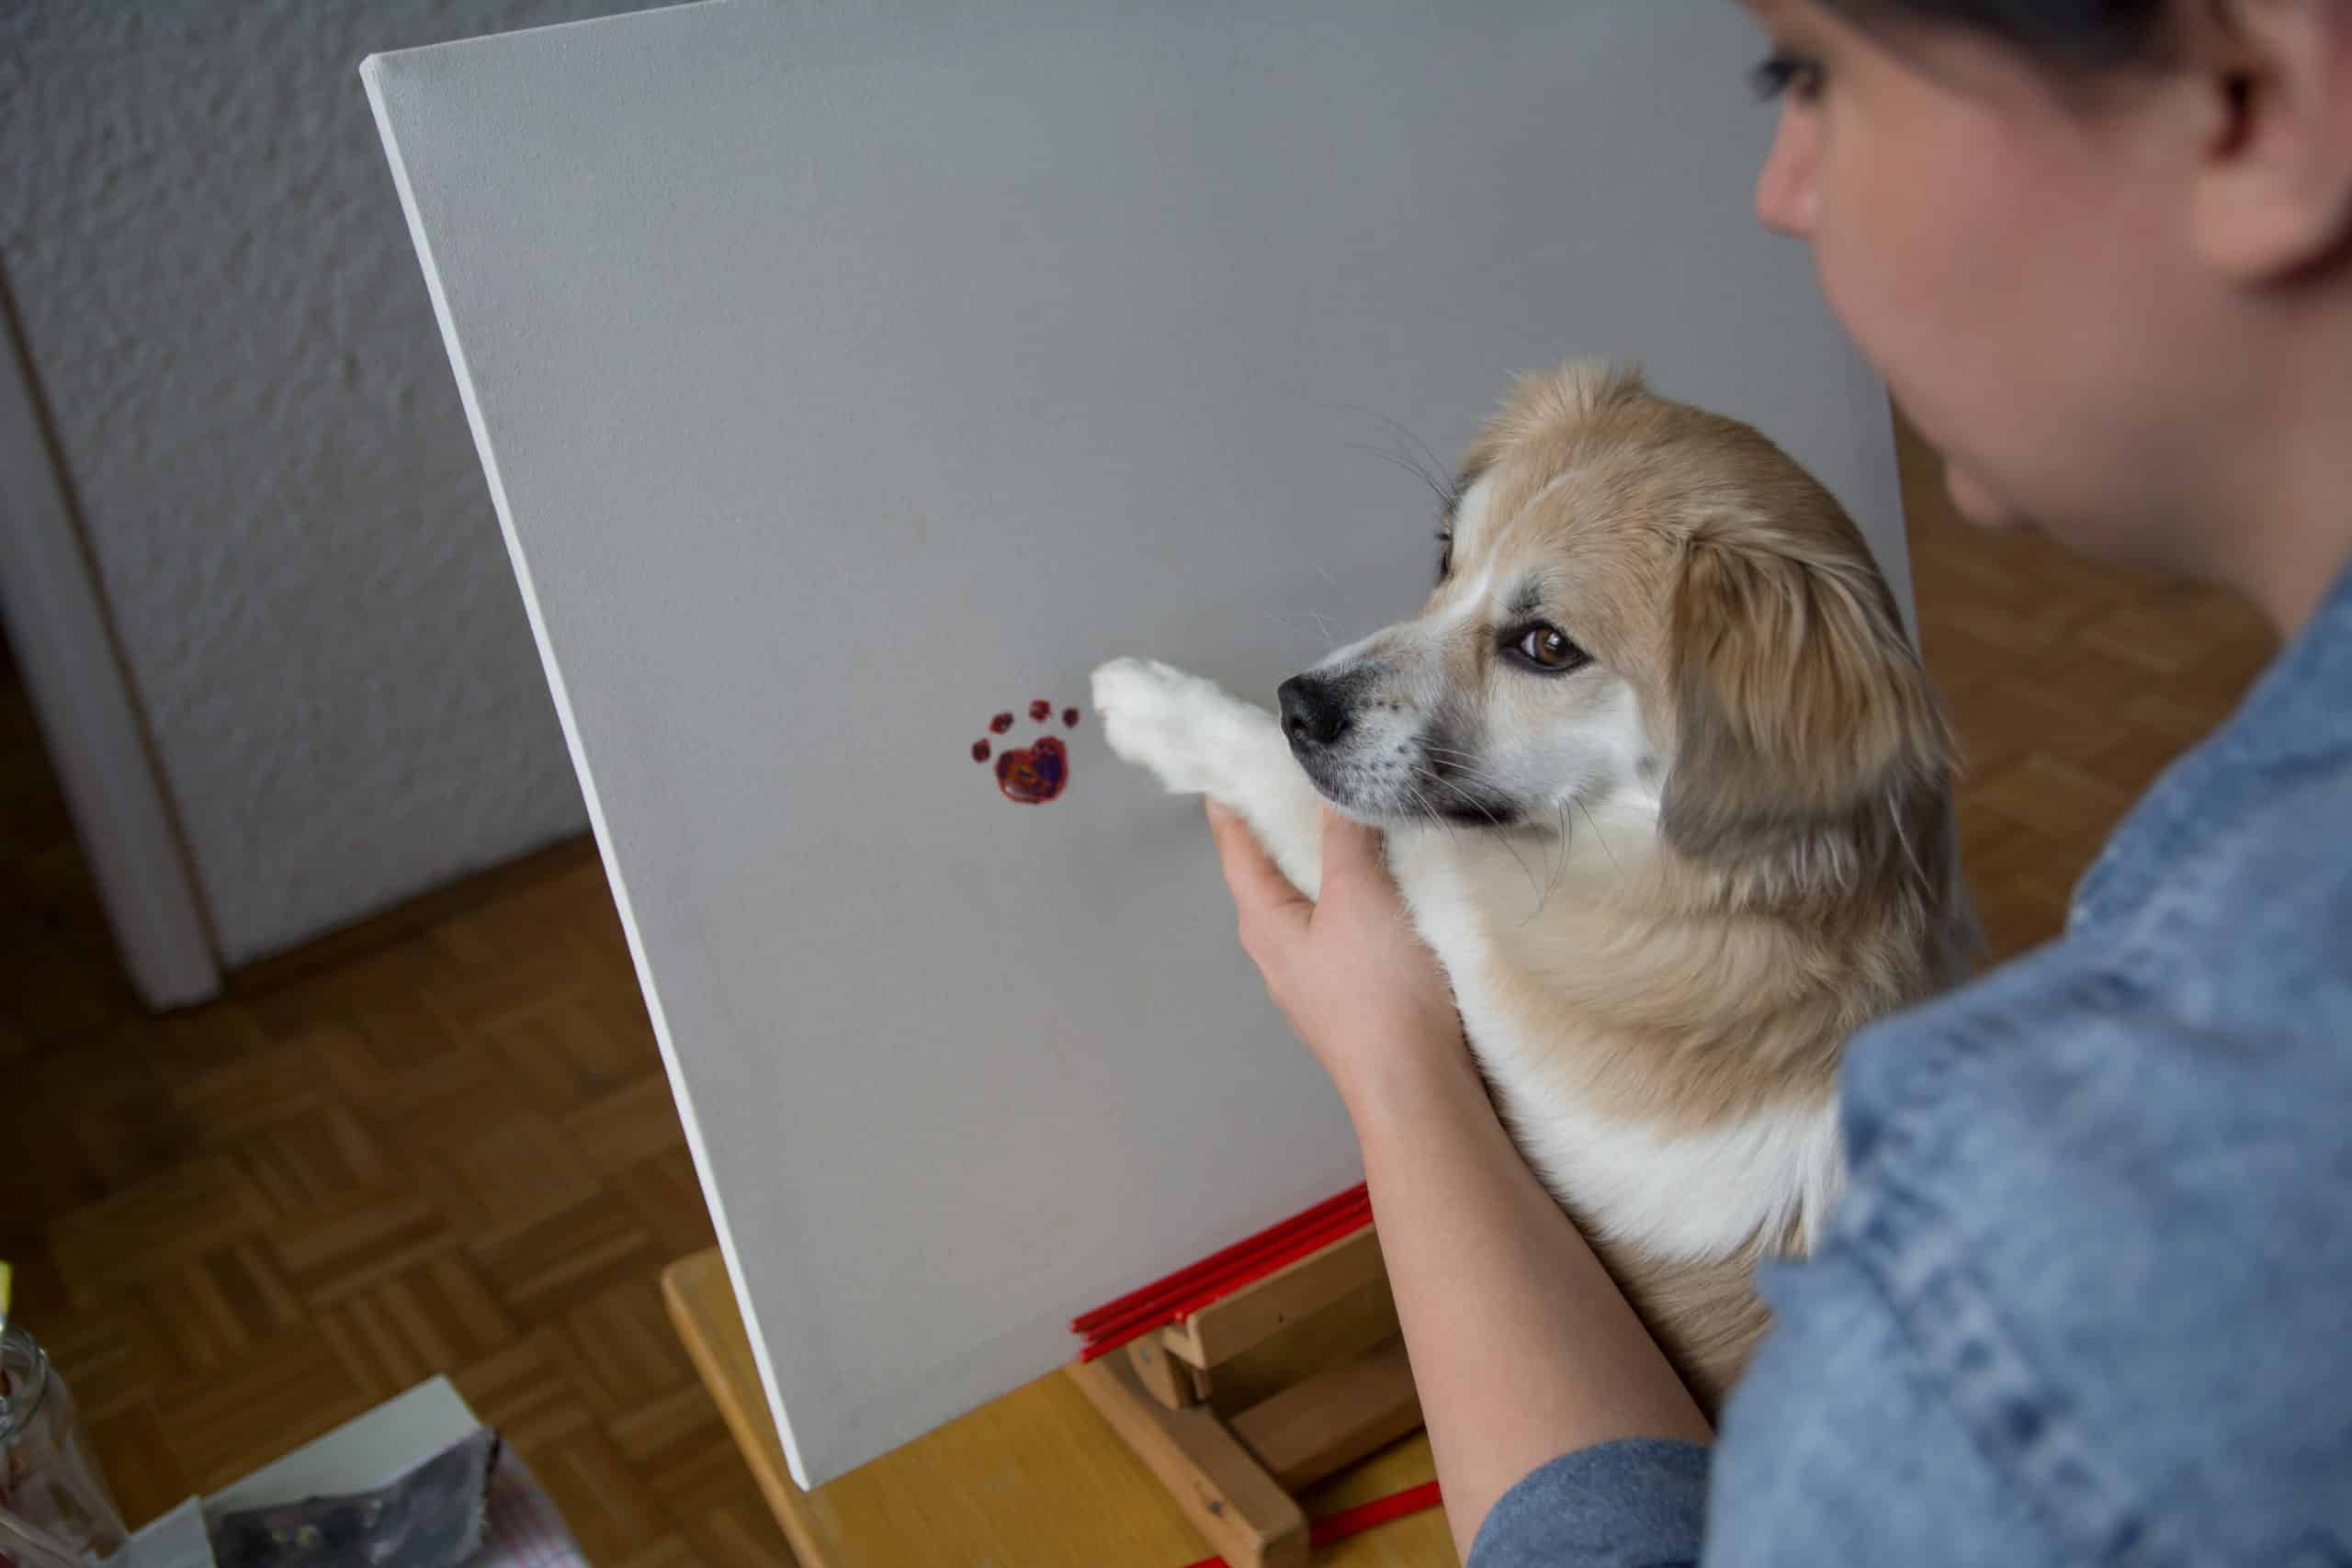 DIY crafting with your dog